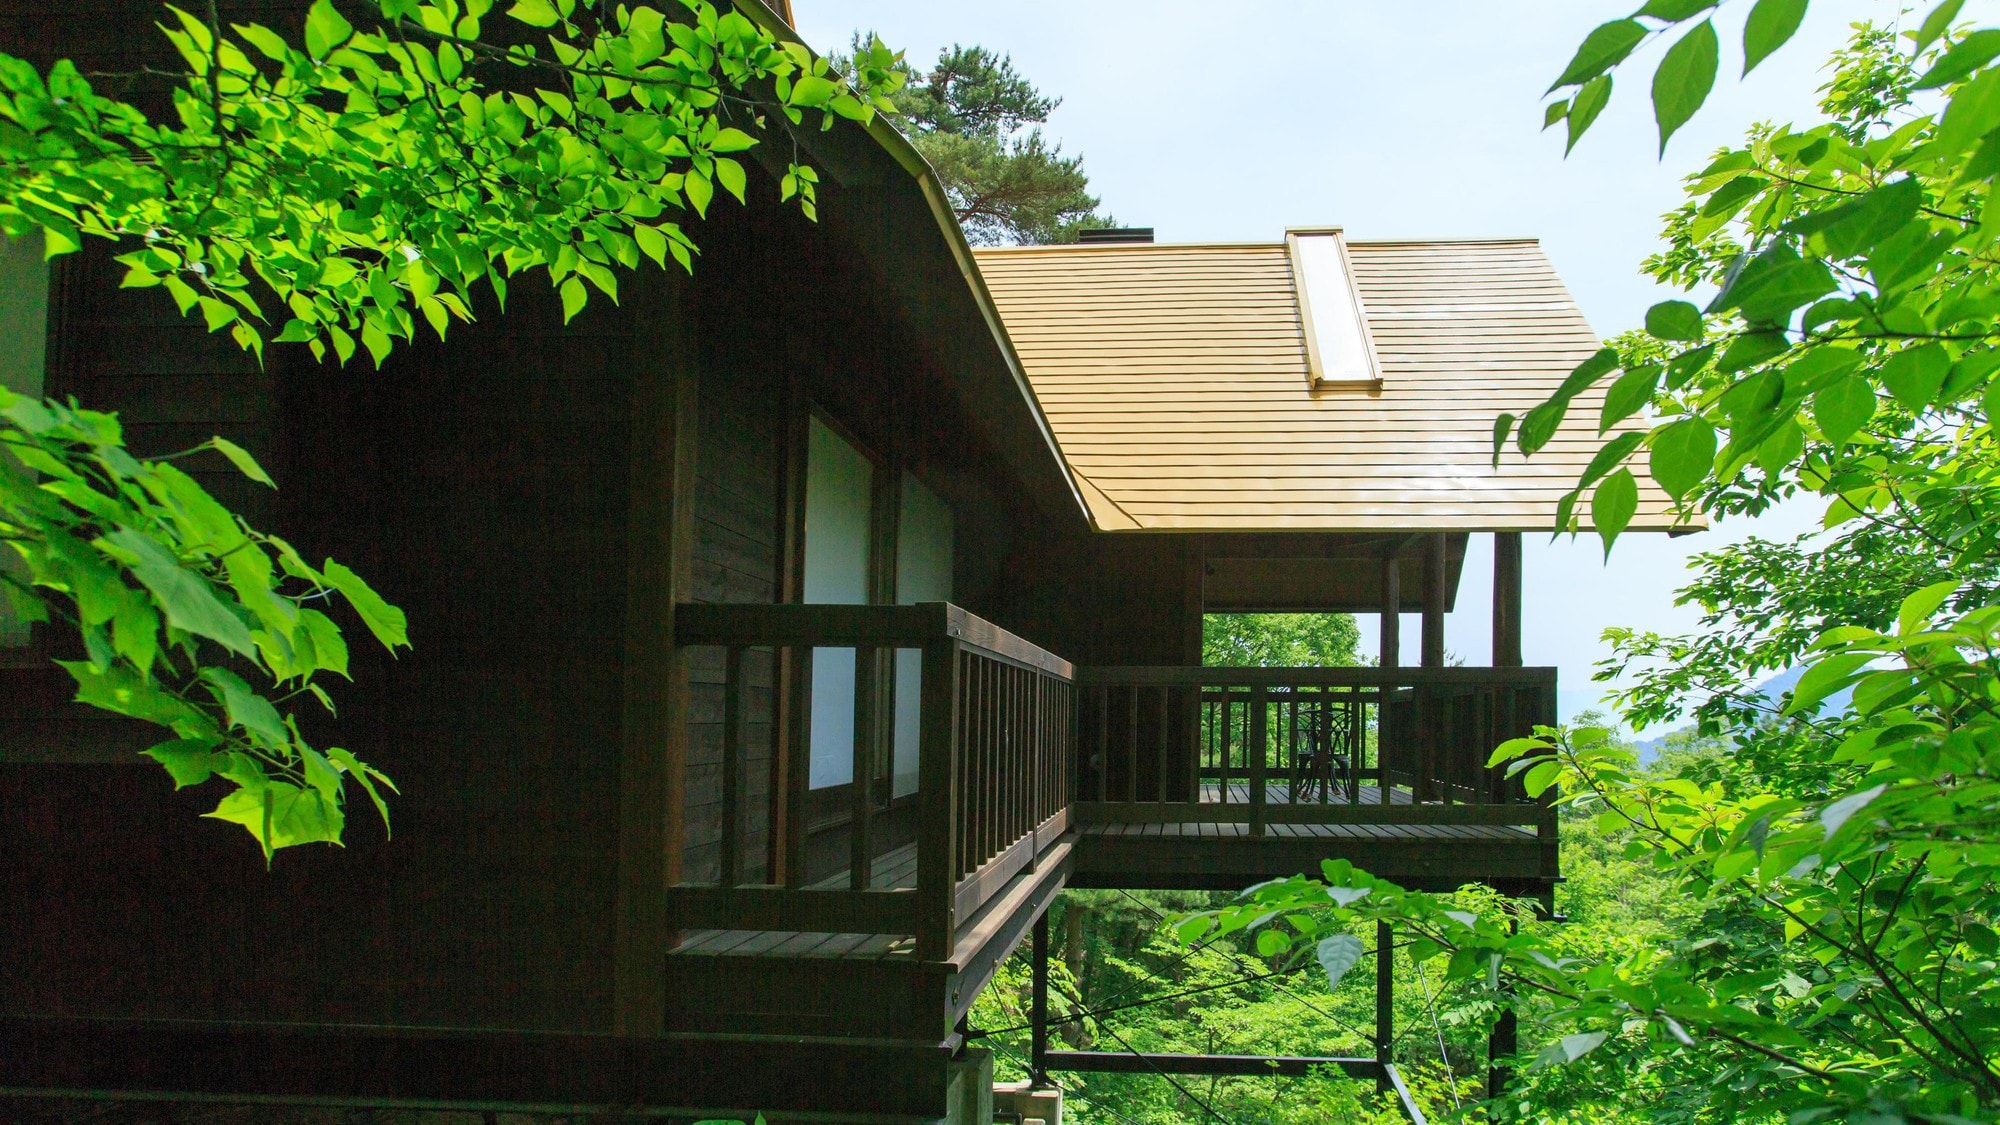 ■ Exterior of single-family cottage ■